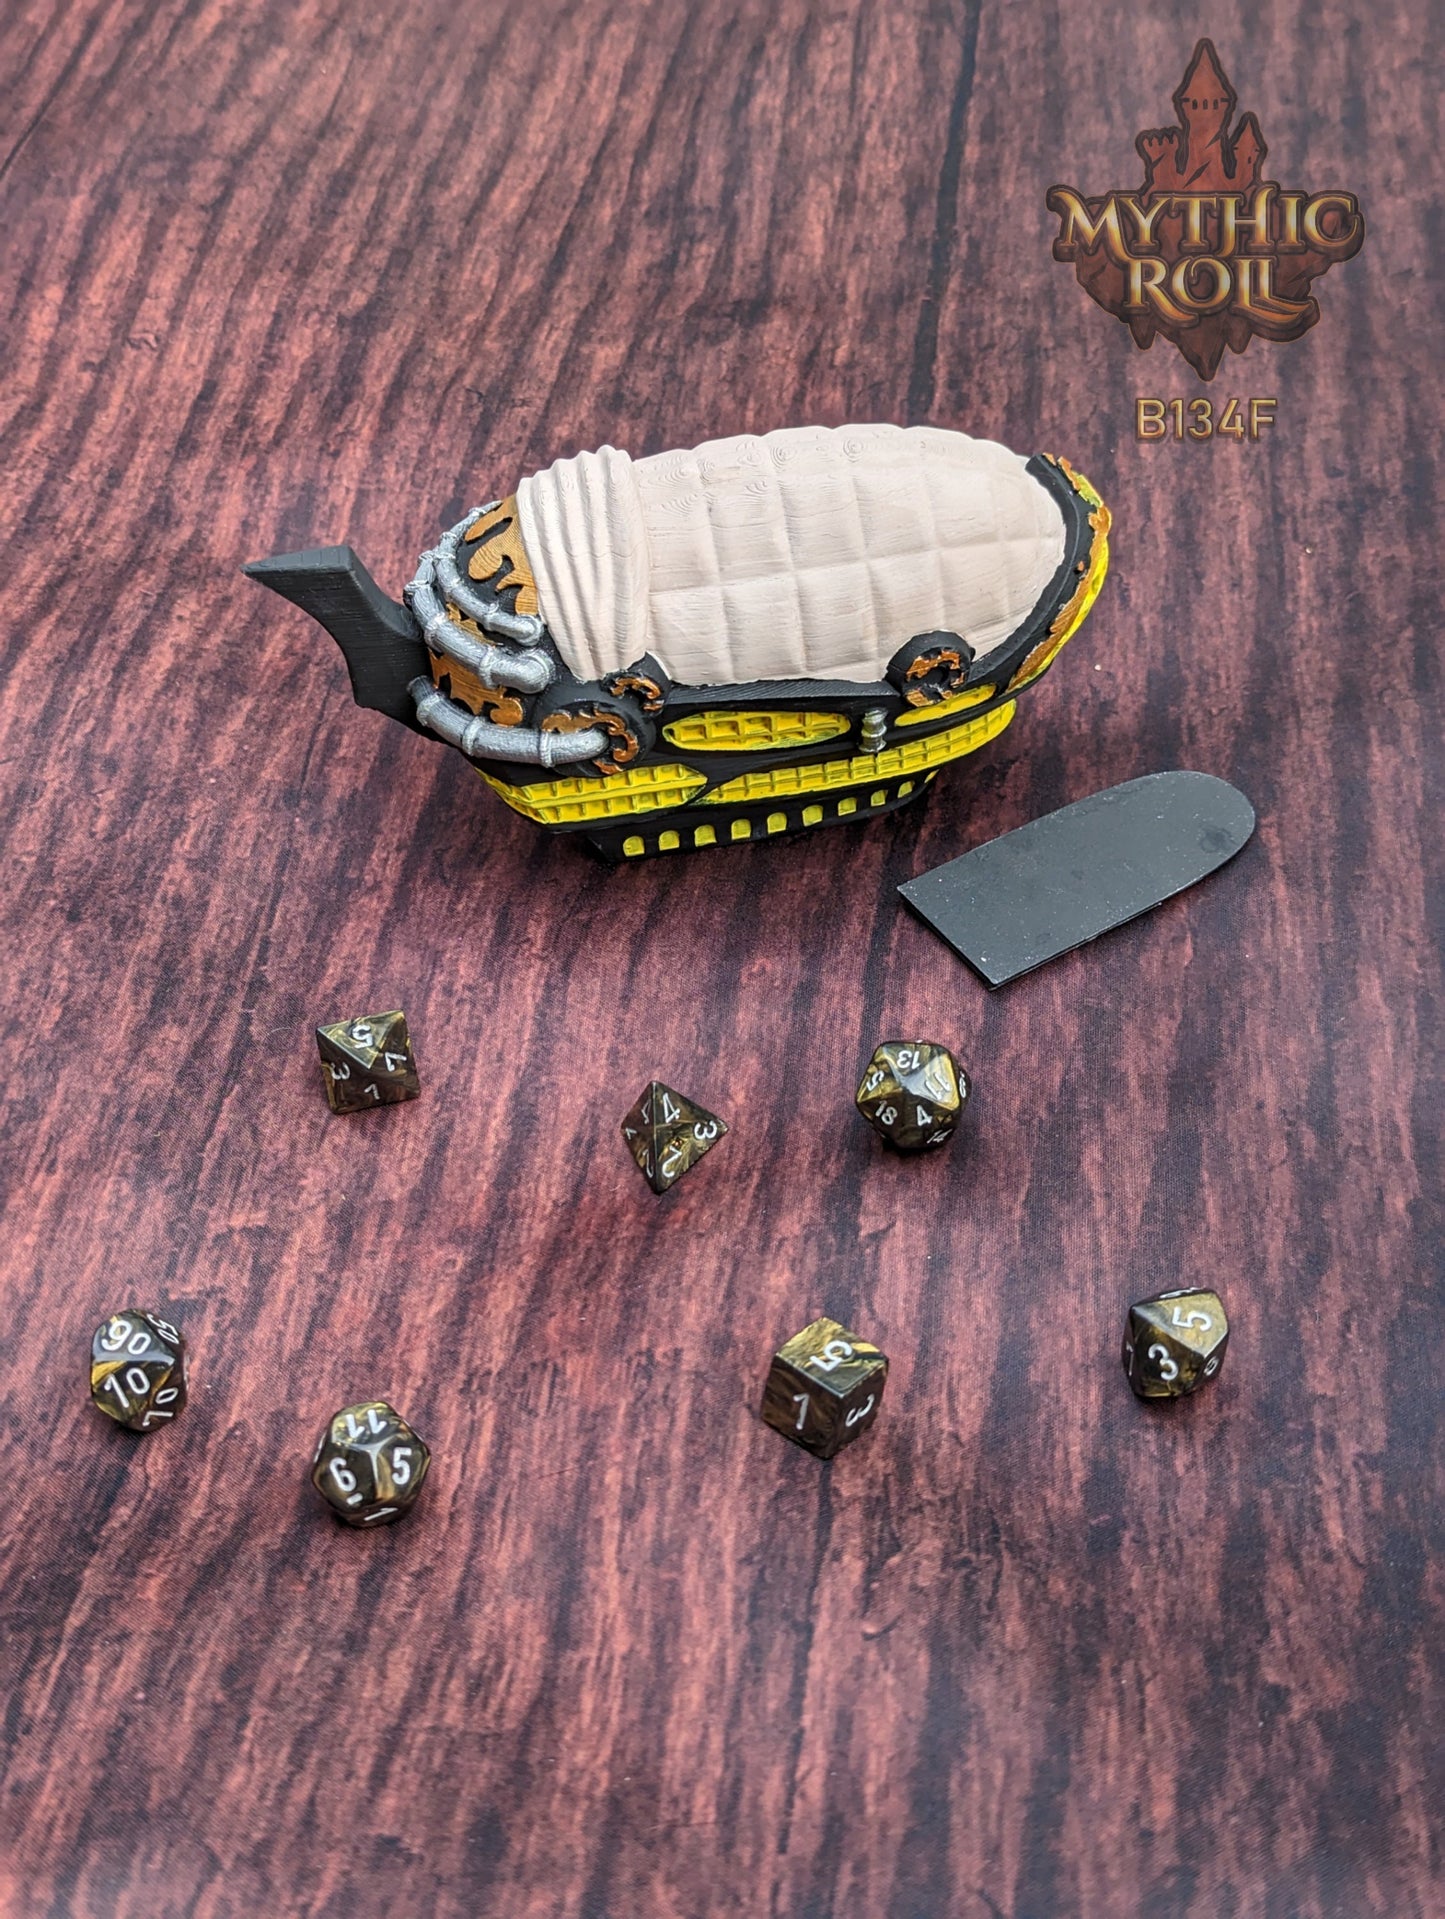 Steampunk Blimp Airship 3D Printed Dice Vault - Mythic Roll by Unchained Games | RPG Dice Jail | D20 Dice Box - Elevate Your Rolls!